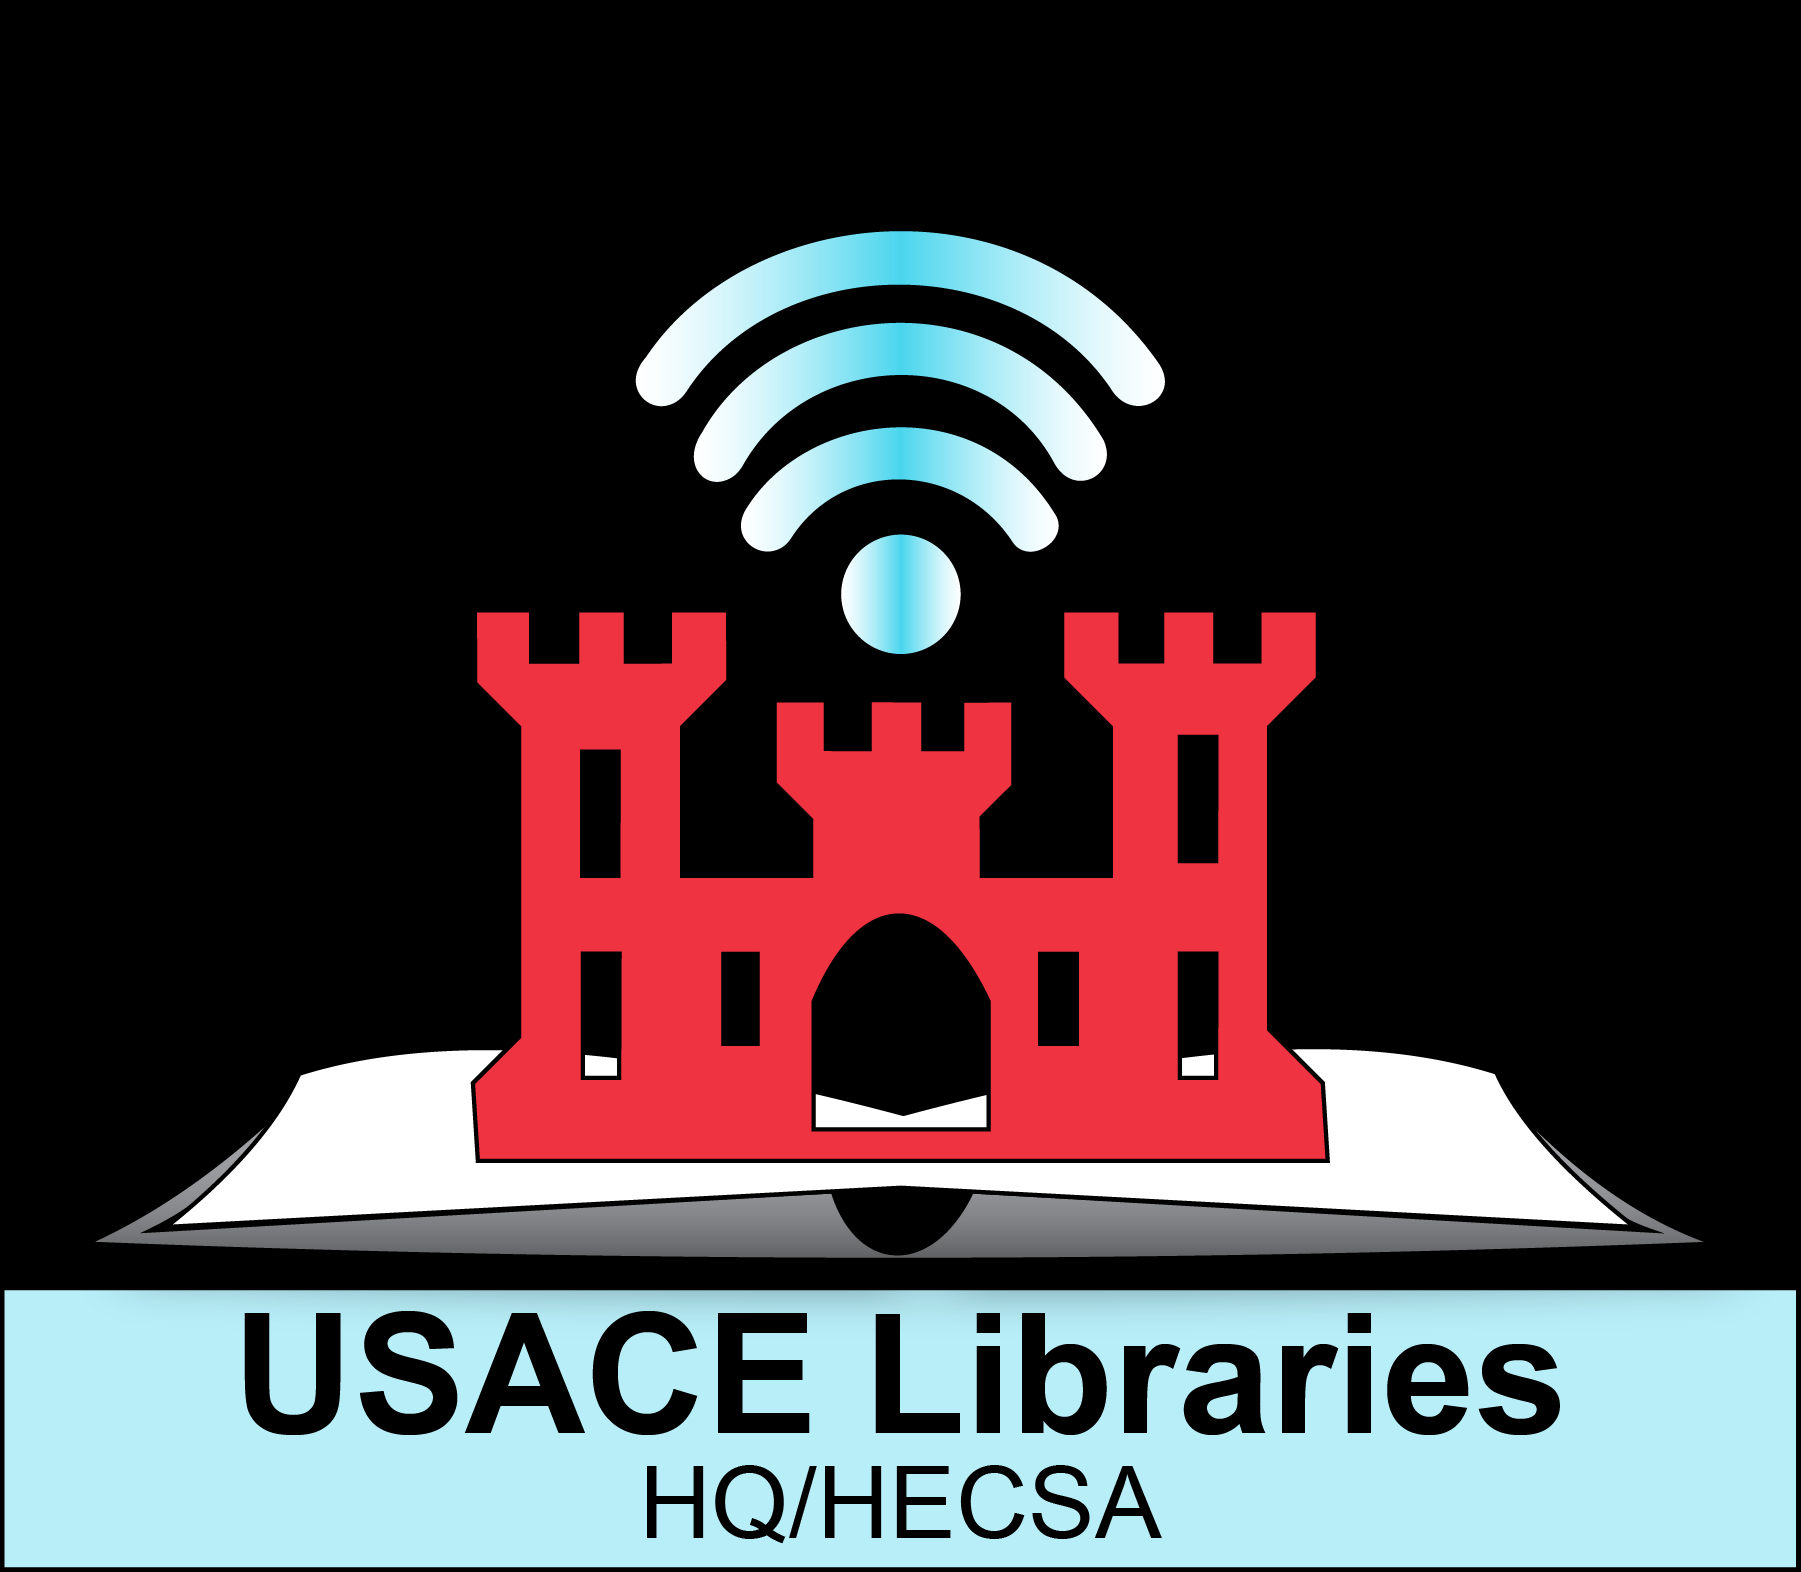 castle-shaped logo for HQ/HECSA Library